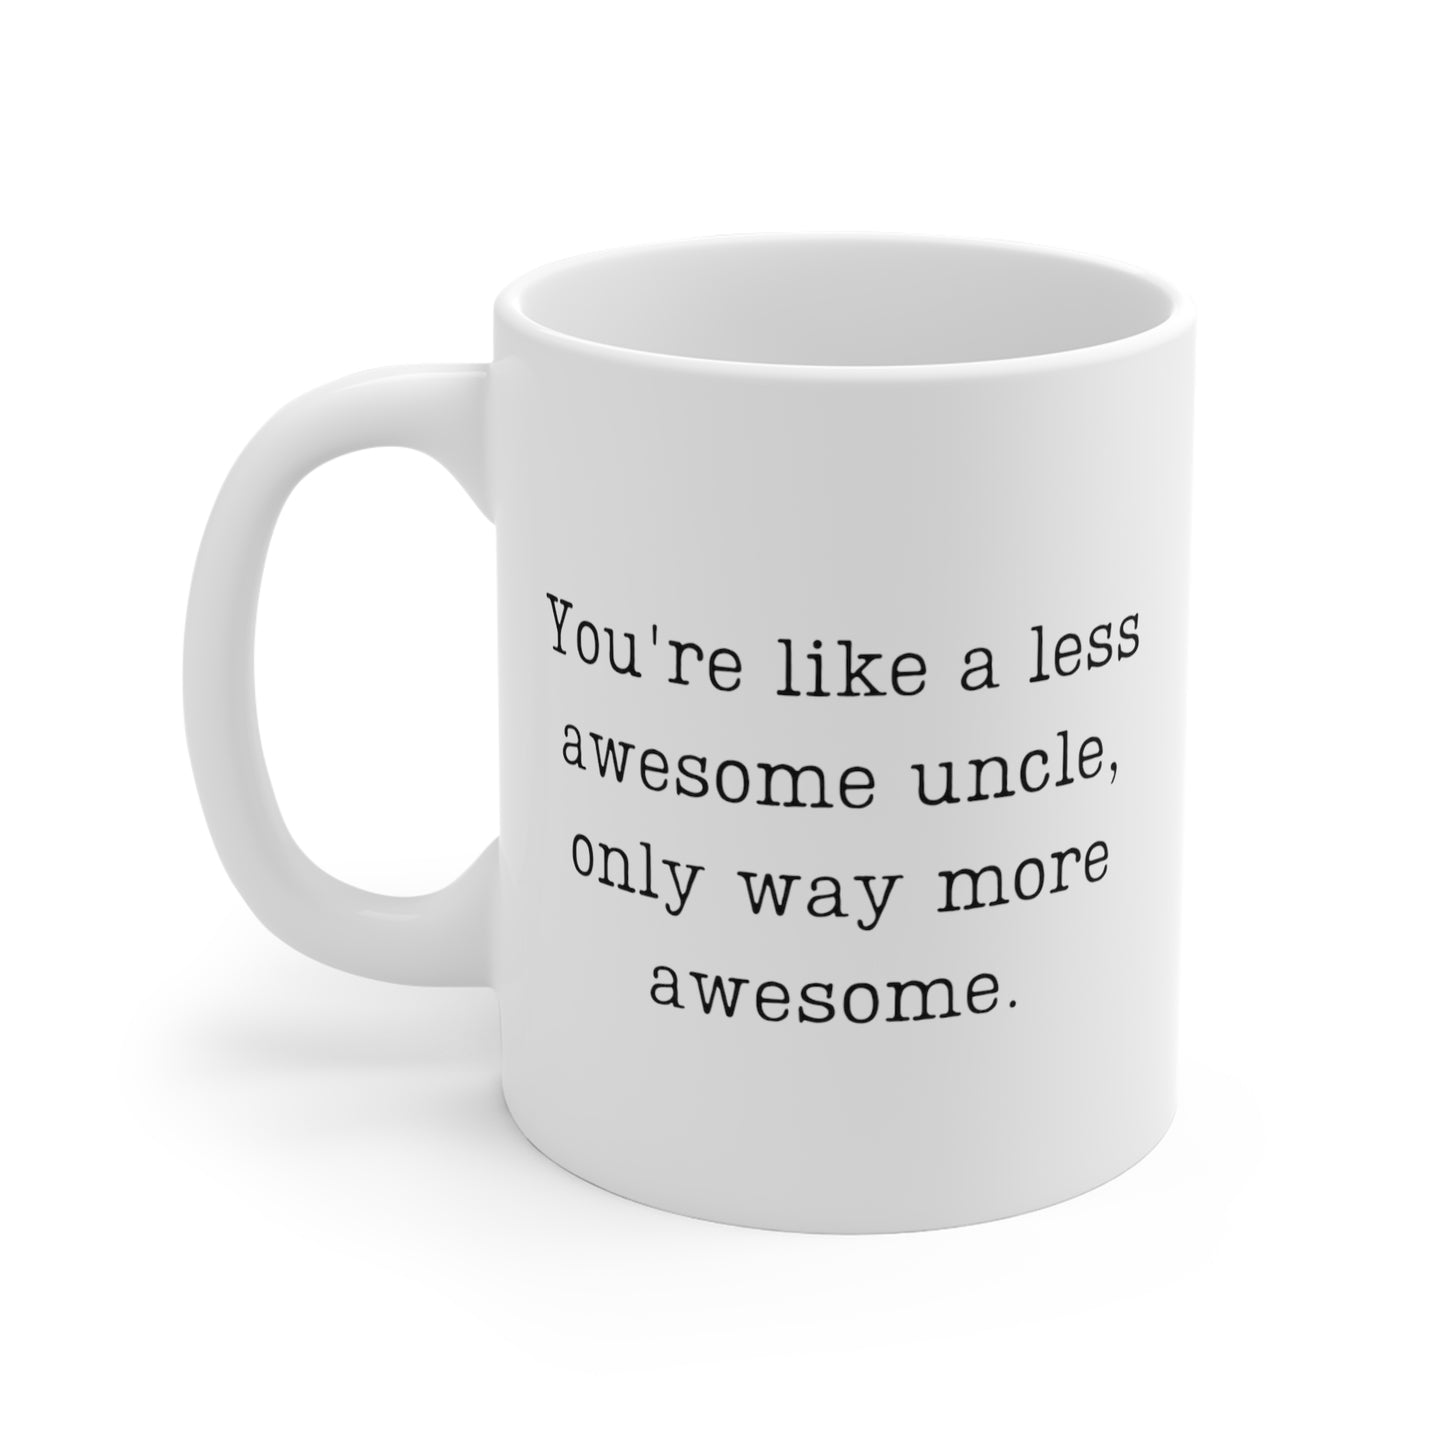 You're Like A Less Awesome Uncle, Only Way More Awesome | Funny, Snarky Gift | White Ceramic Mug, Typewriter Font